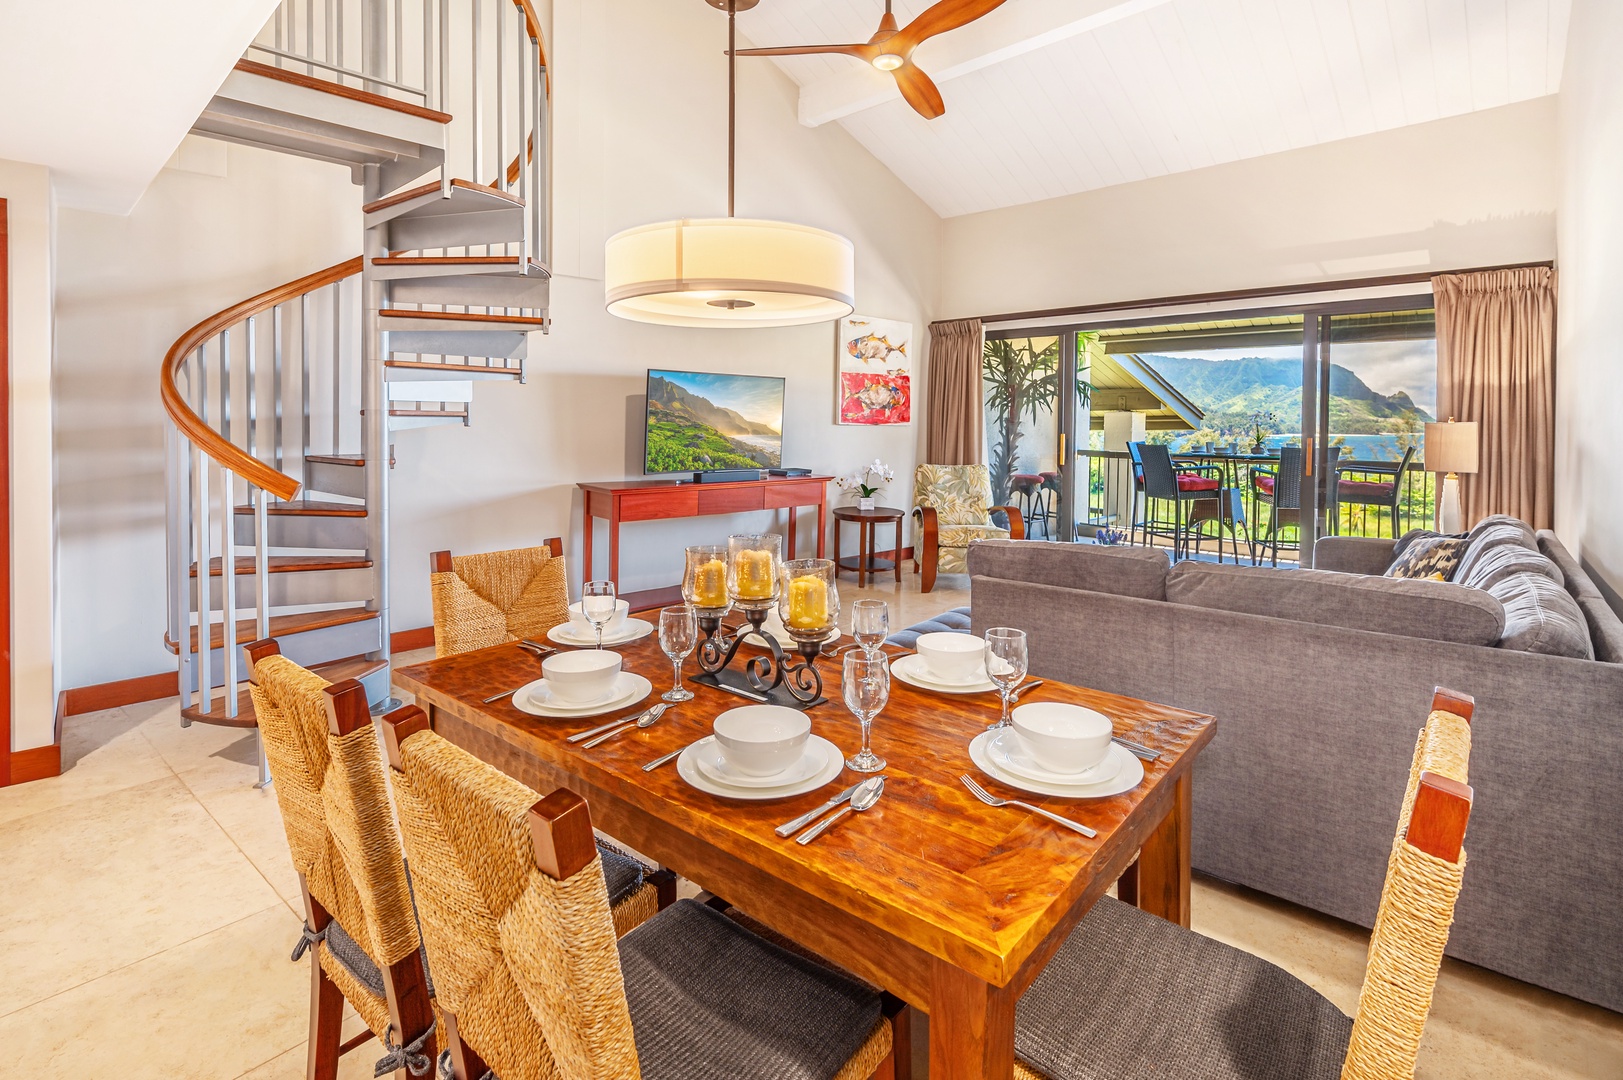 Princeville Vacation Rentals, Hanalei Bay Resort 7307 - Dining for six people